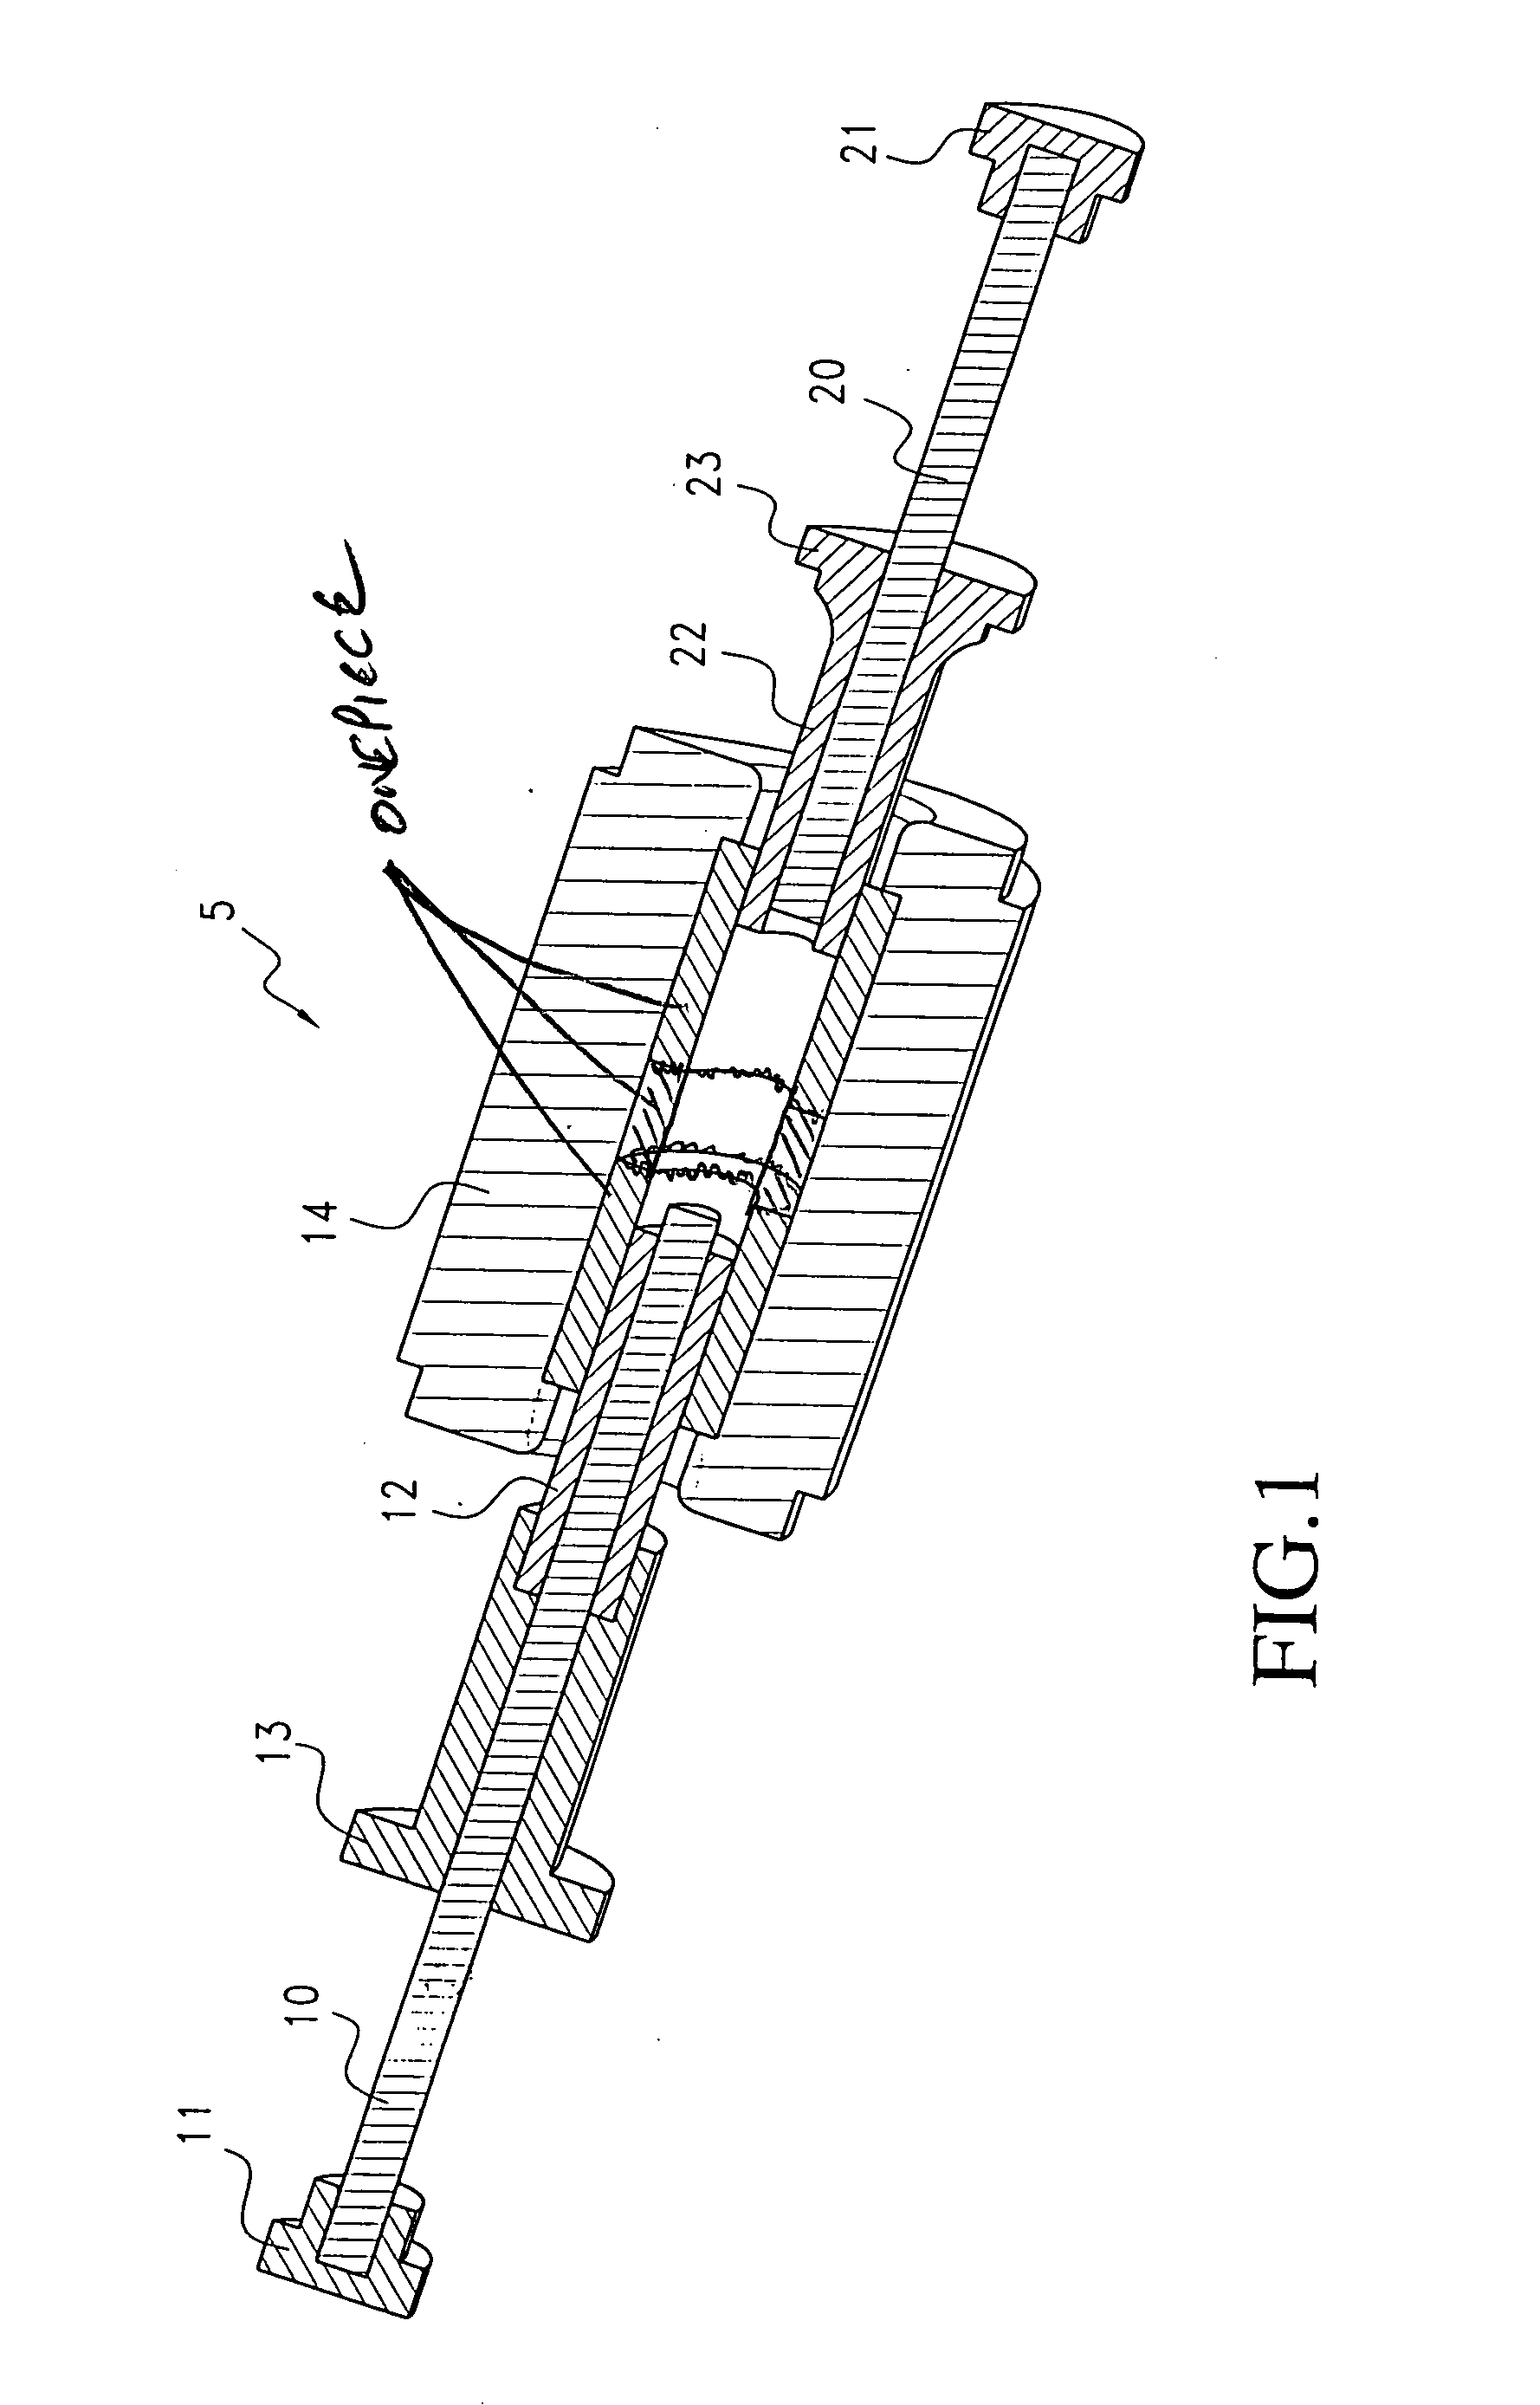 Cold forging apparatus and method for forming complex articles